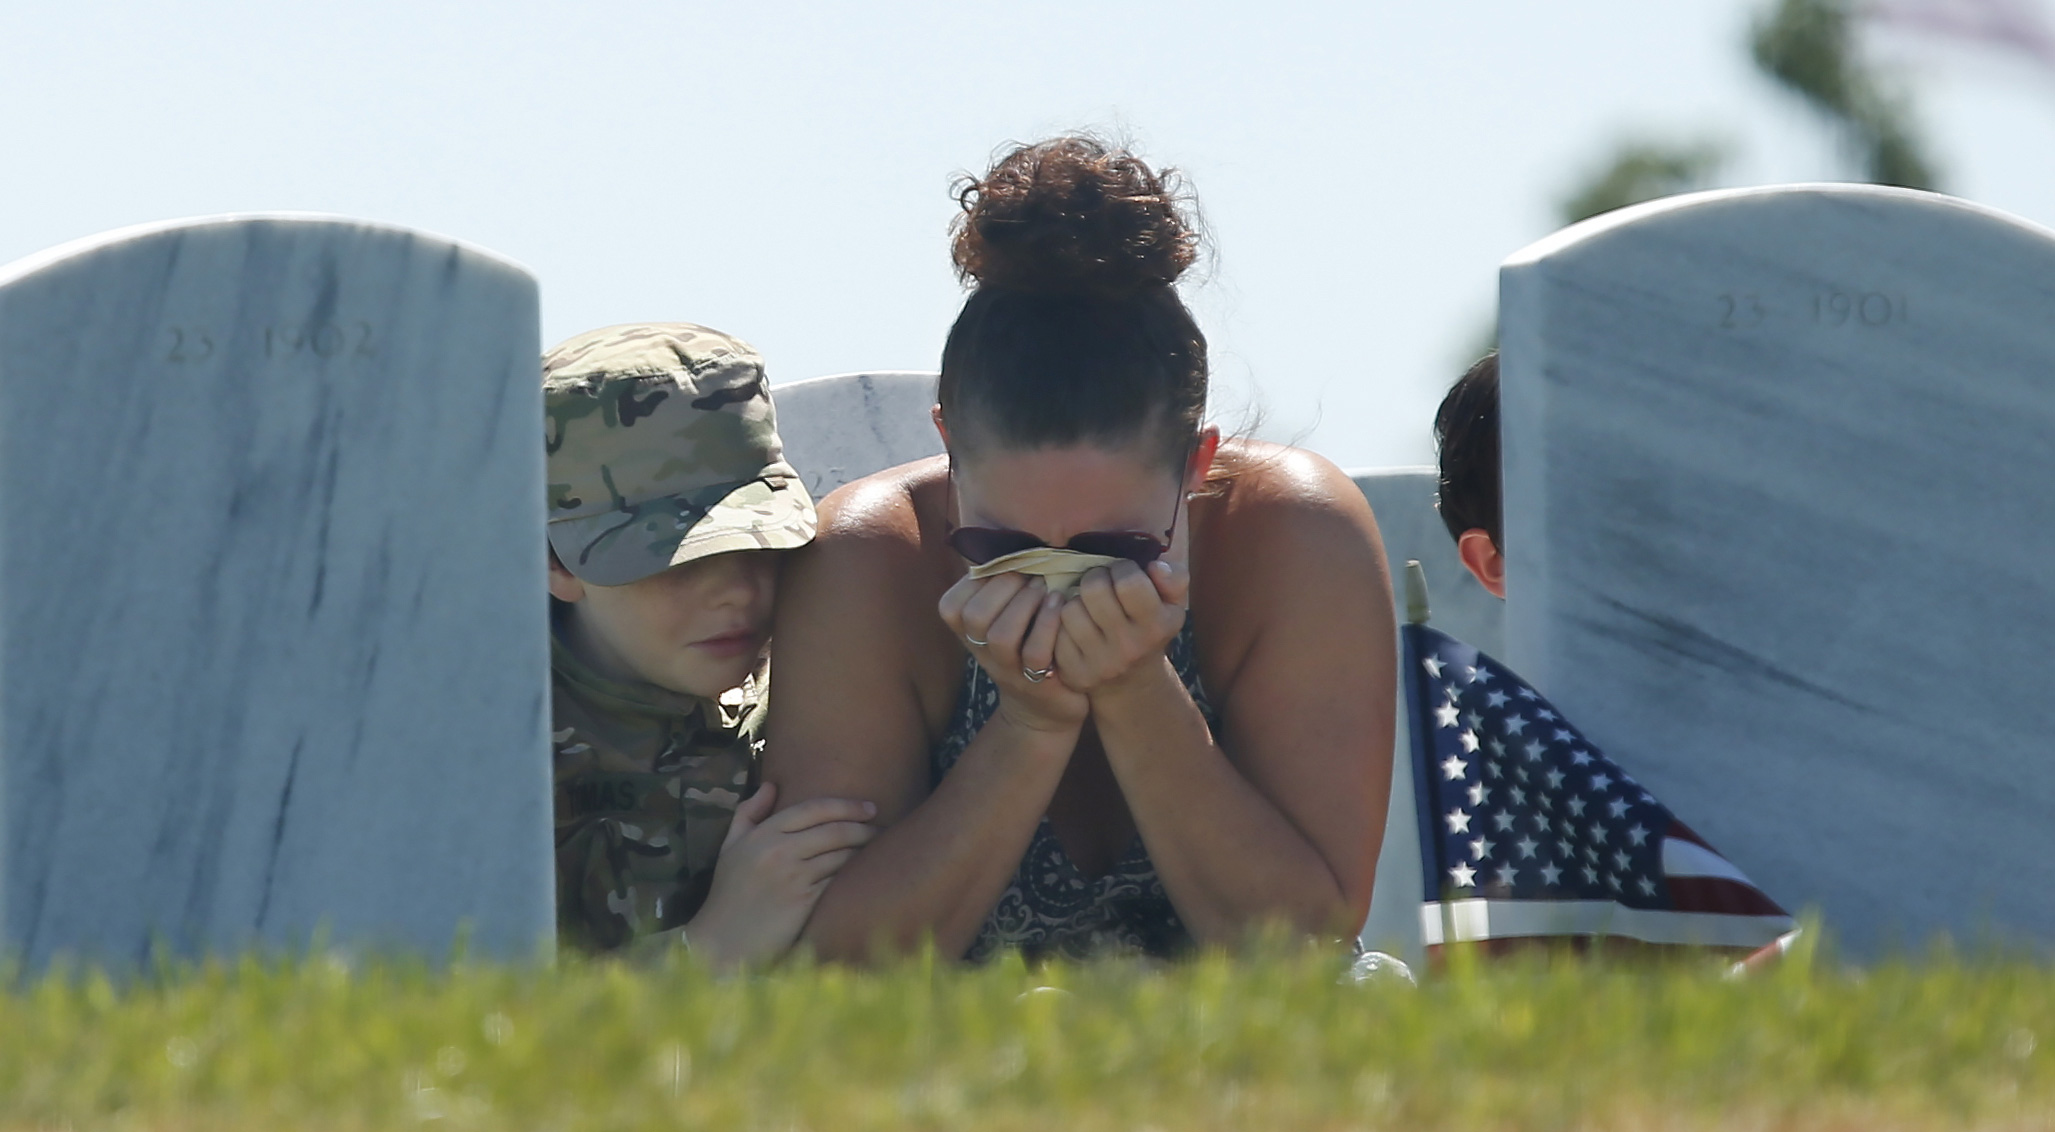 Heidi Hannah holds her head in her hands, as she is joined by her sons Tomas, 10, left, and Lucas, 8, right, at a Memorial Day visit to the grave of her oldest son, Army Specialist Taylor Hannah, at the Sacramento Valley National Cemetery in Dixon, California